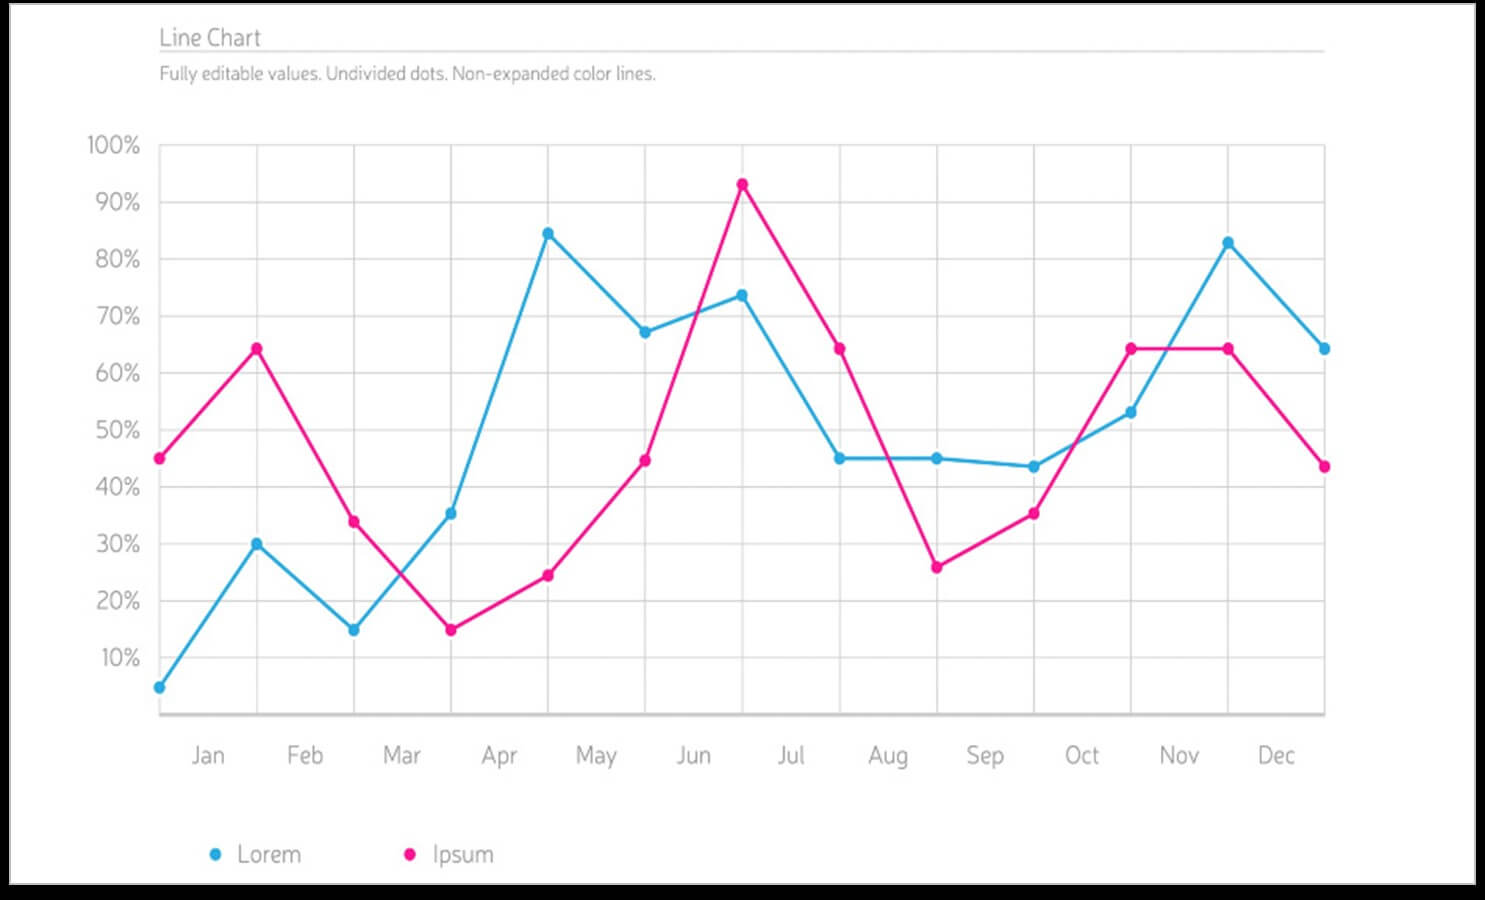 Image of a line chart in a sales pitch deck